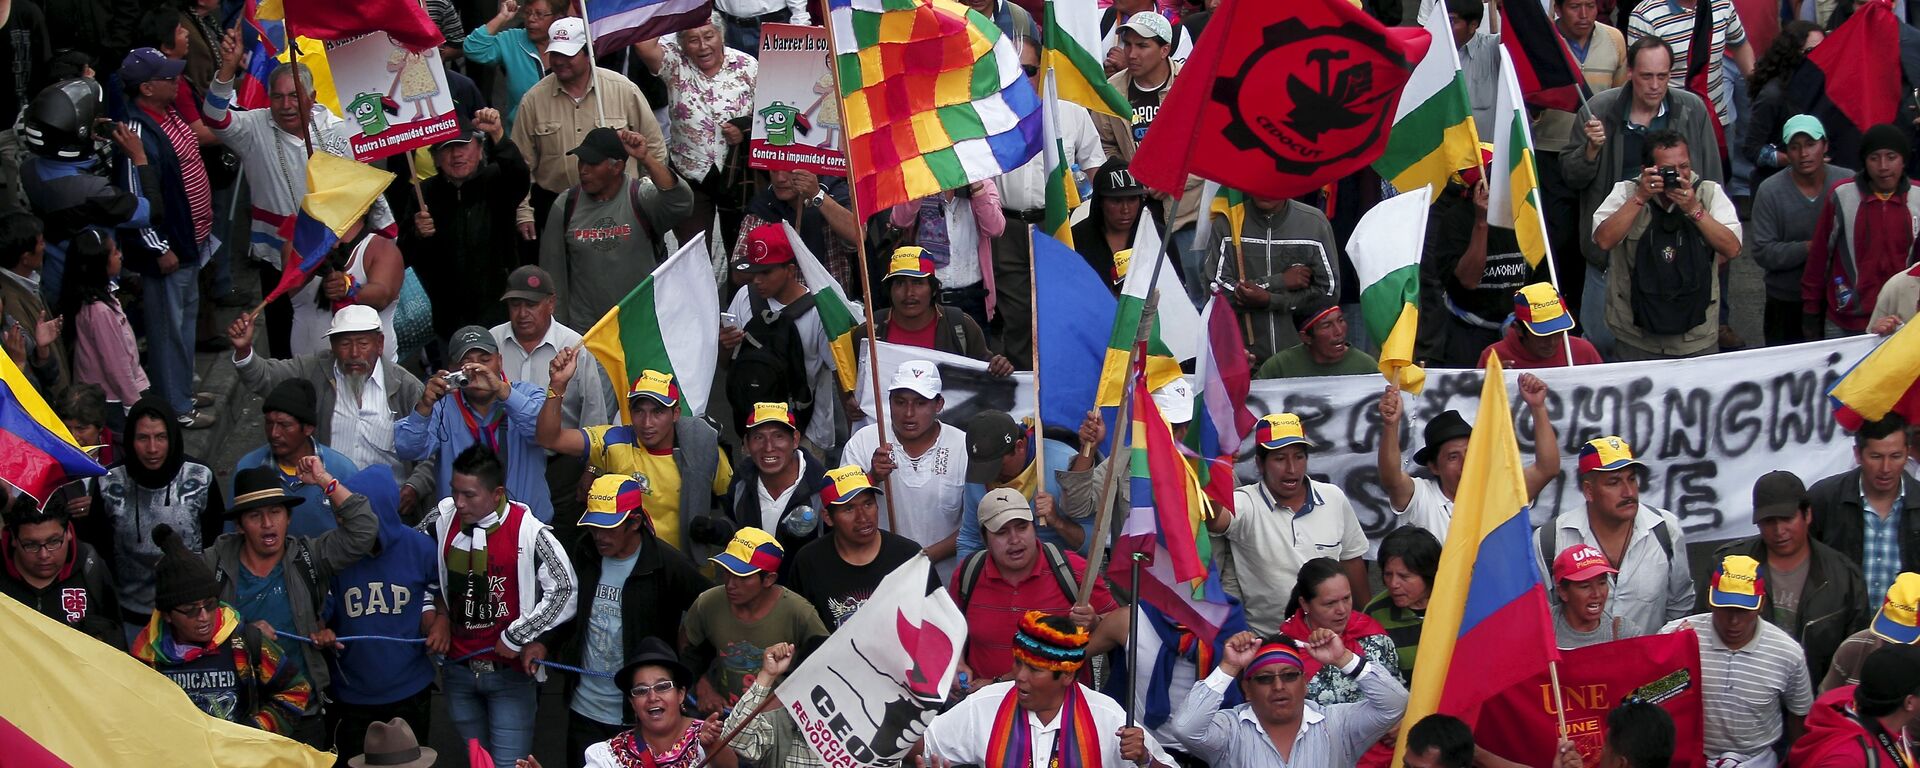 Protesters carry flags and banners while marching in Quito, Ecuador, August 12, 2015 - Sputnik Mundo, 1920, 13.10.2021